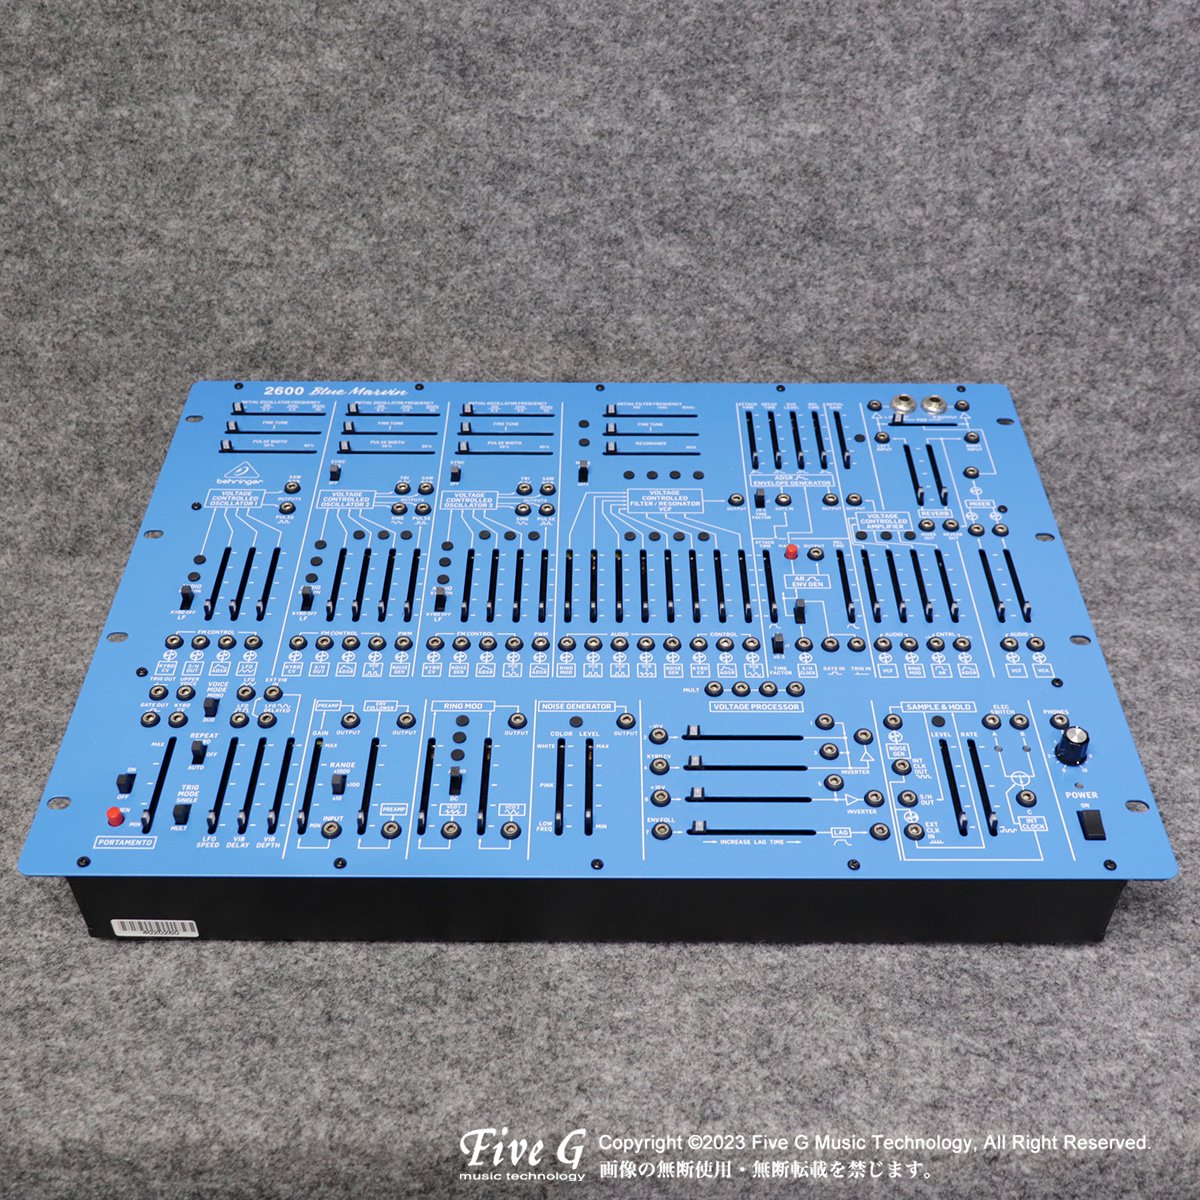 Behringer | 2600 BLUE MARVIN | 中古 - Used - シンセサイザー ...